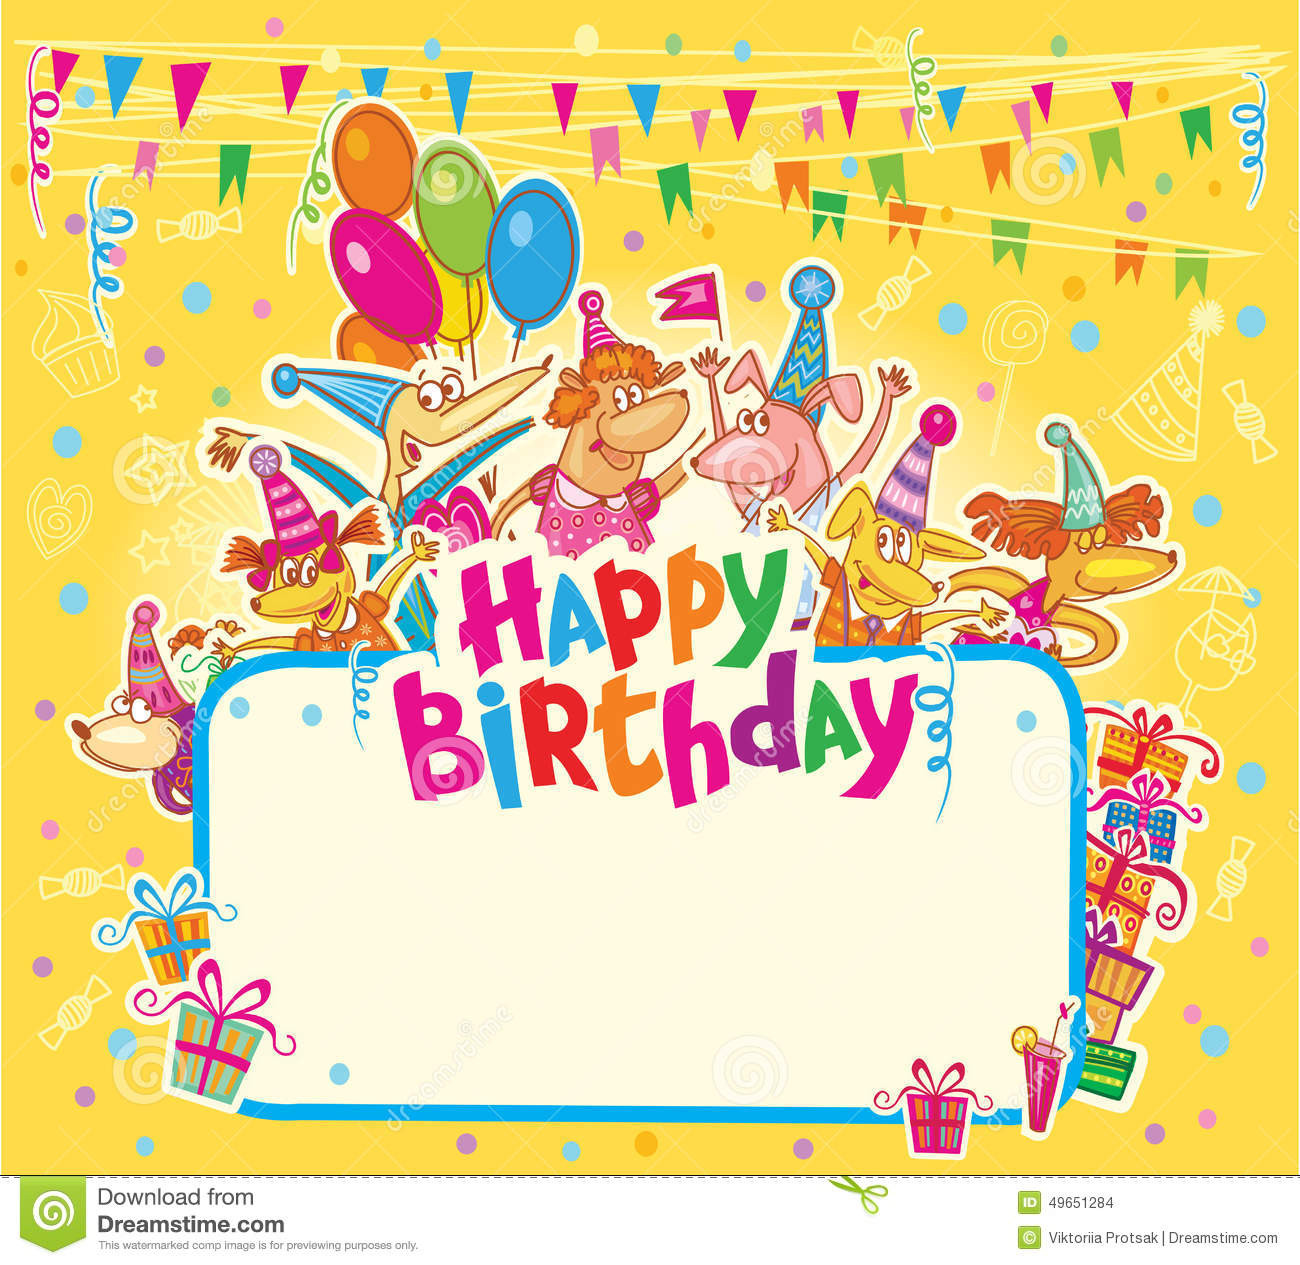 Best ideas about Birthday Card Template
. Save or Pin Happy Birthday Card Template intended for ucwords] – Card Now.